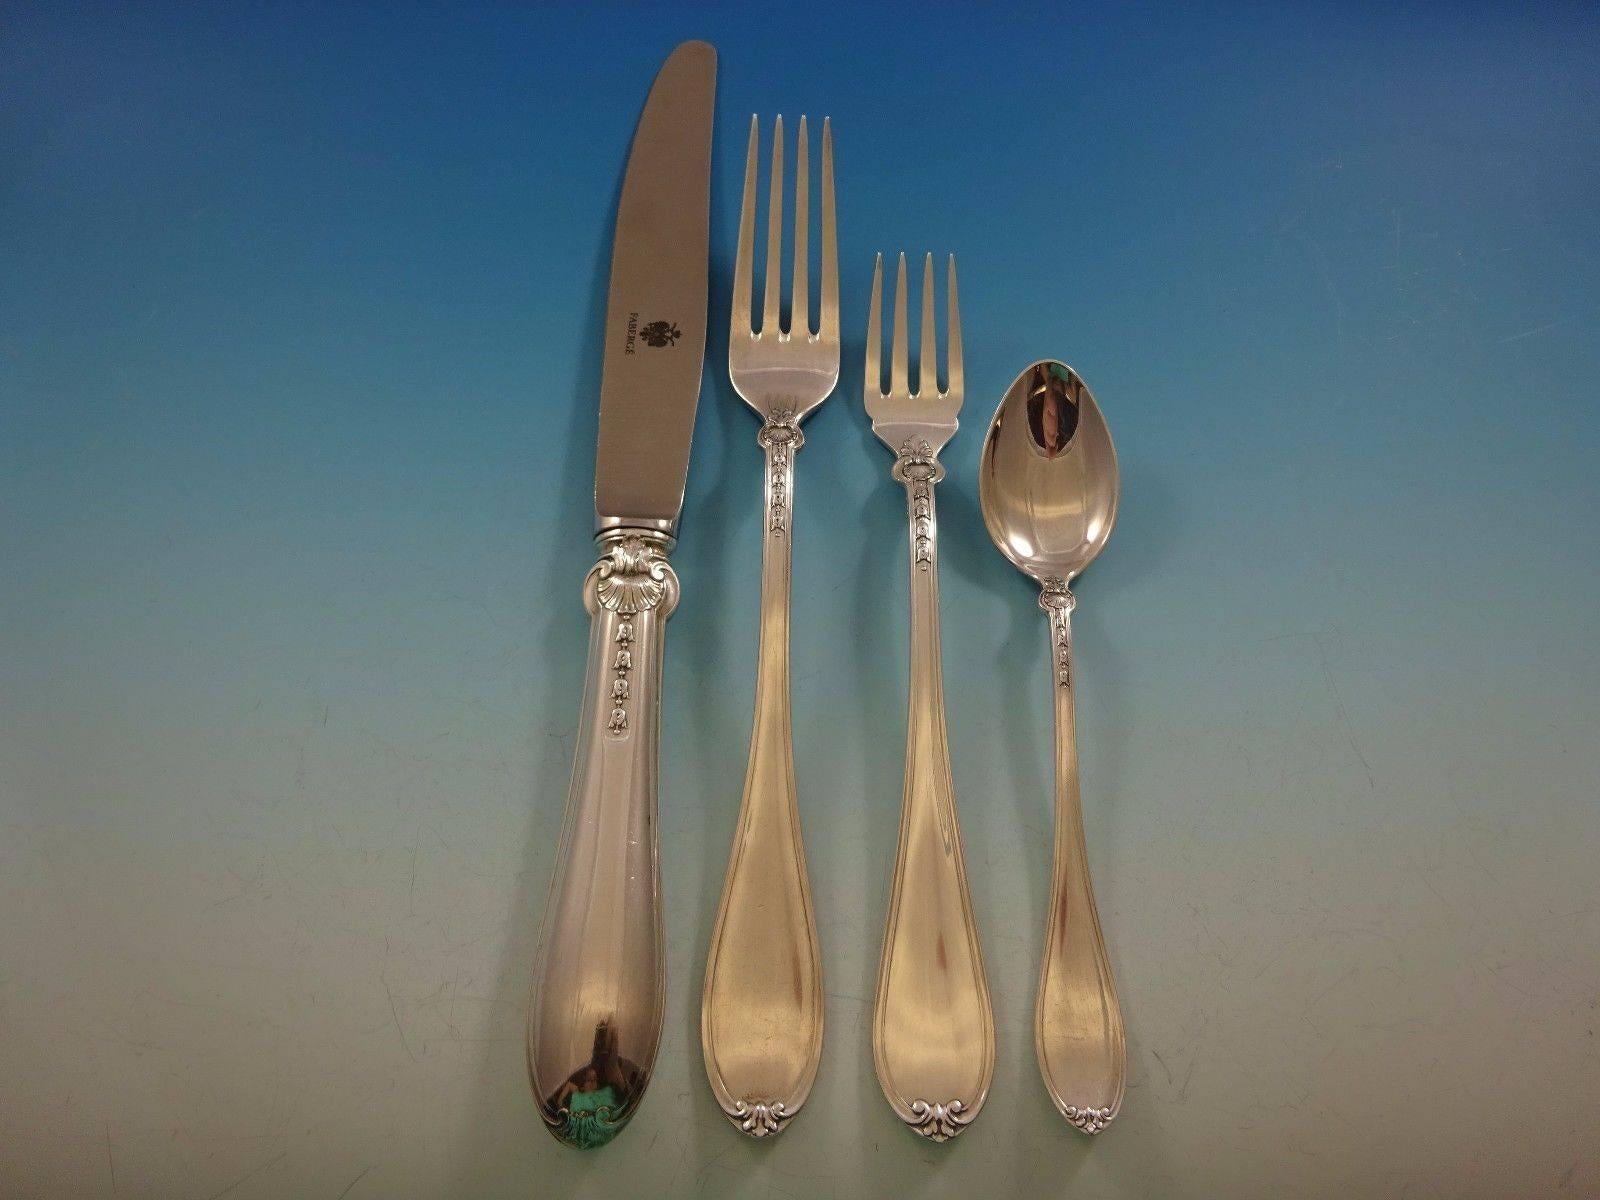 Rare Gatchina Palace by Faberge sterling silver dinner size flatware set of 63 pieces. Fabergé is known as the most revered name in luxury. 

This set includes:

12 dinner knives, 9 3/4